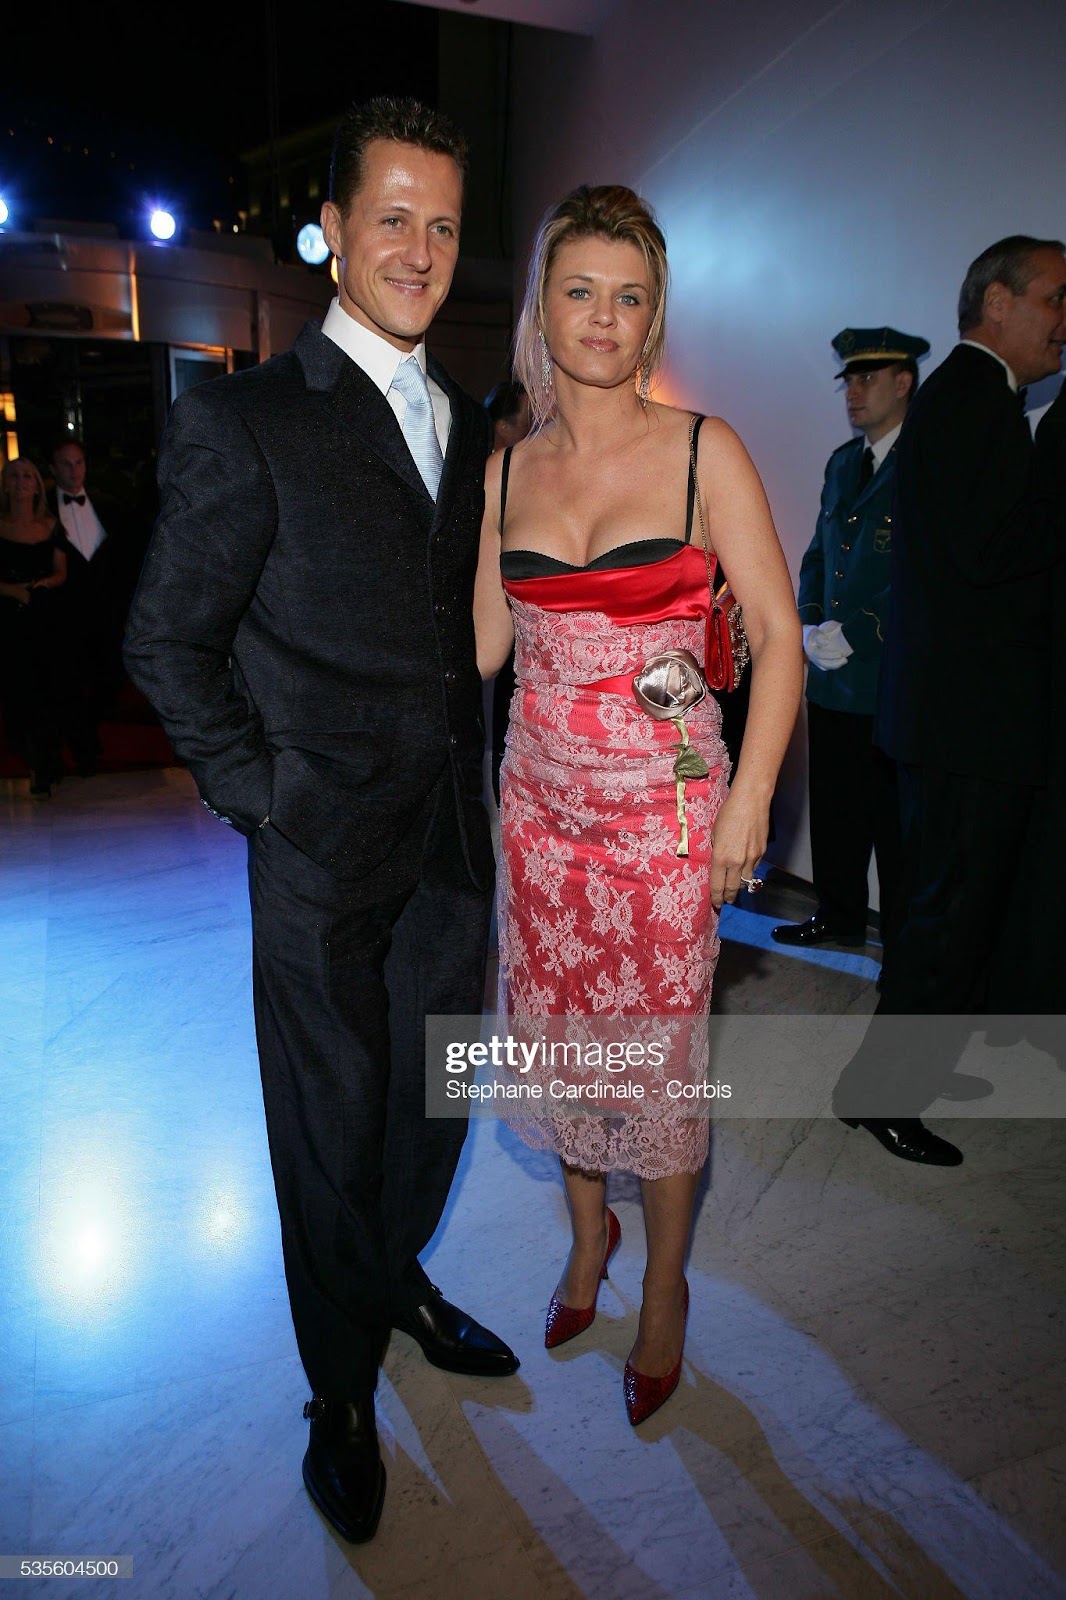 Michael Schumacher arrives with his wife Corinna at the FIA gala in Monaco on December 09, 2005.